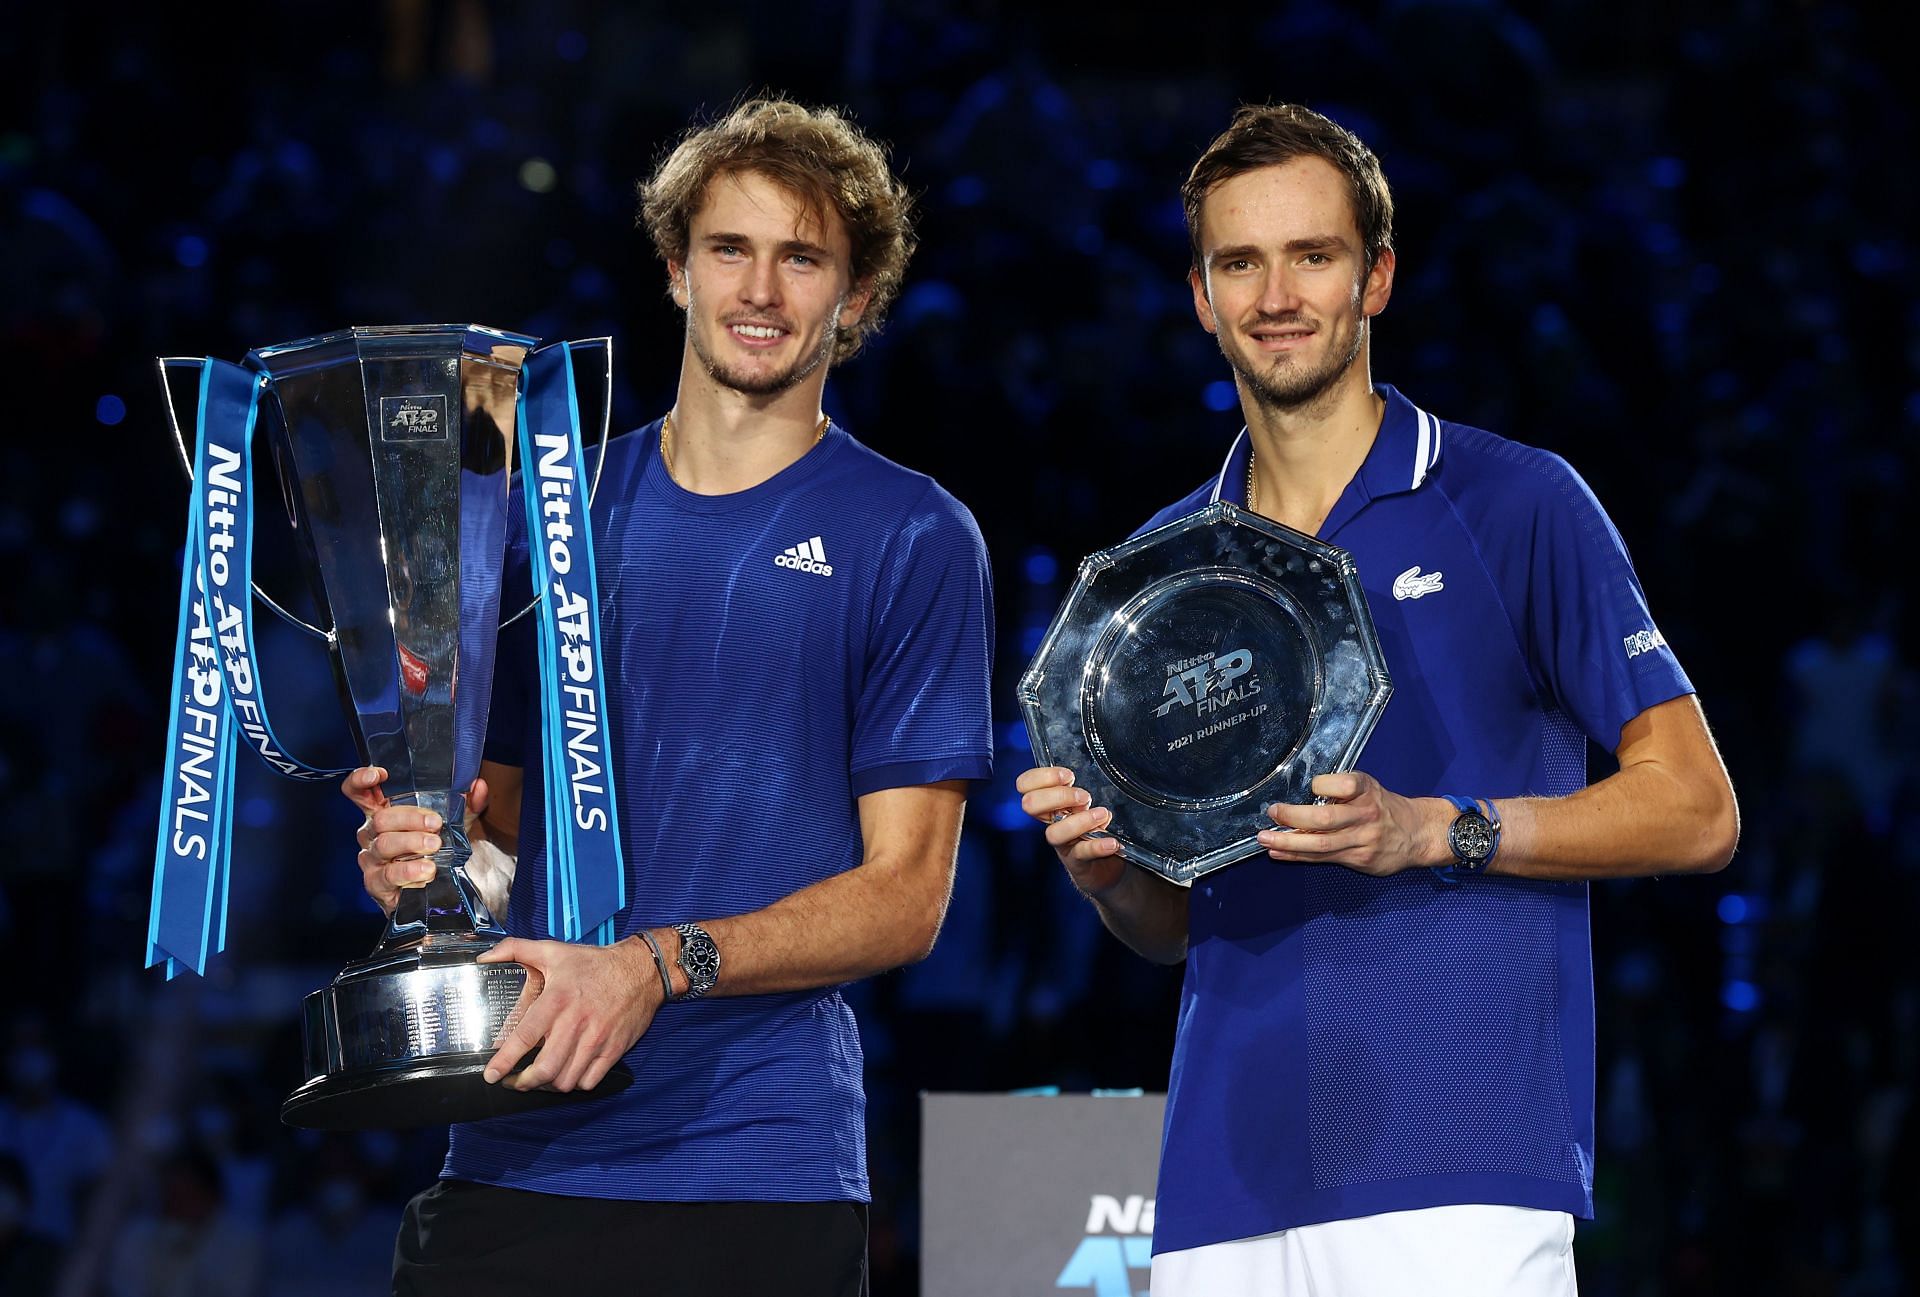 Alexander Zverev and Daniil Medvedev after the final of the 2021 Nitto ATP World Tour Finals